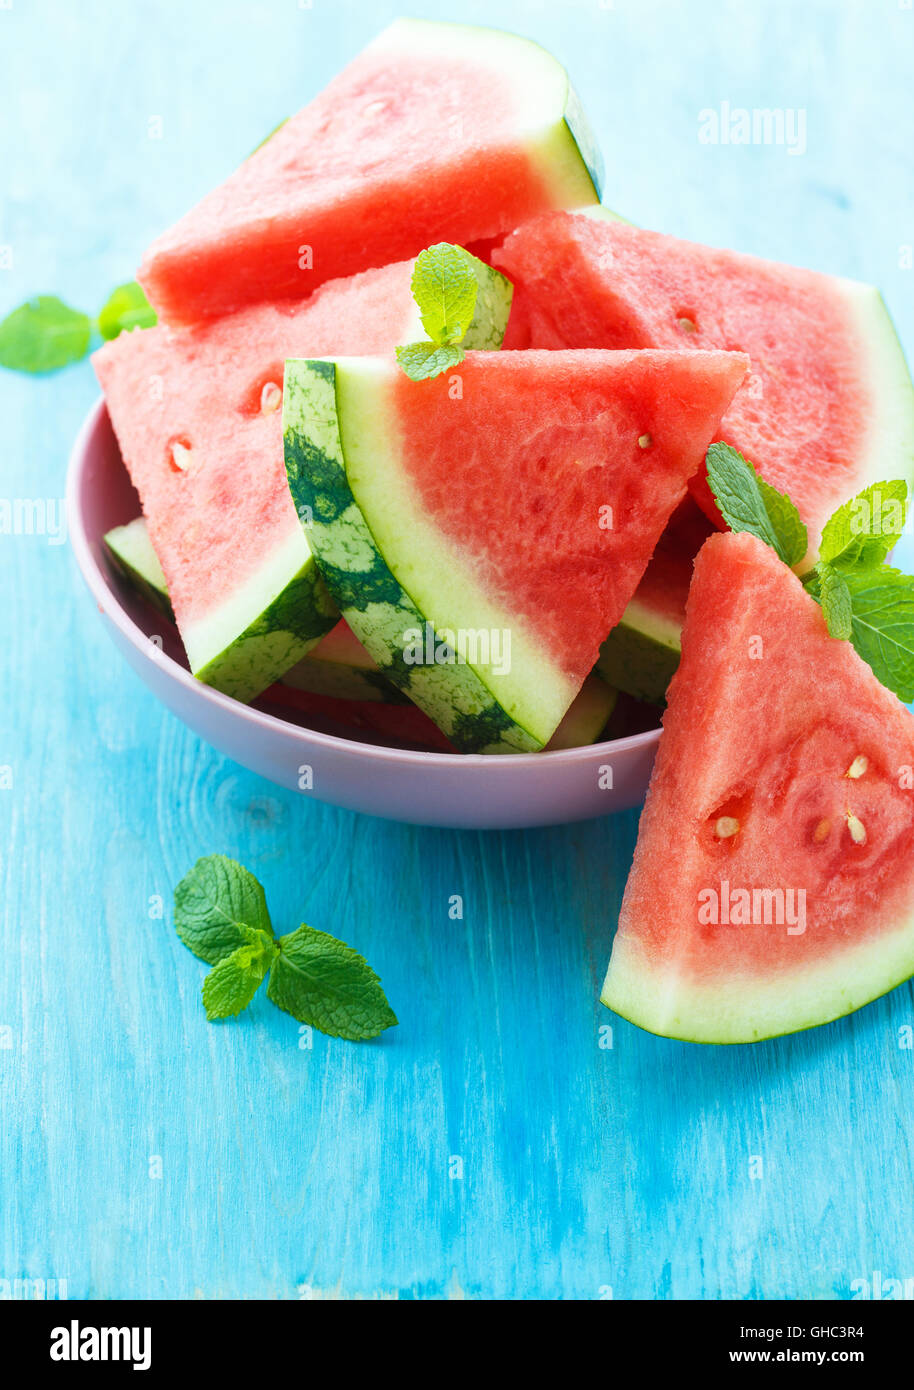 Triangular slices of fresh watermelon with mint on blue wooden background Stock Photo